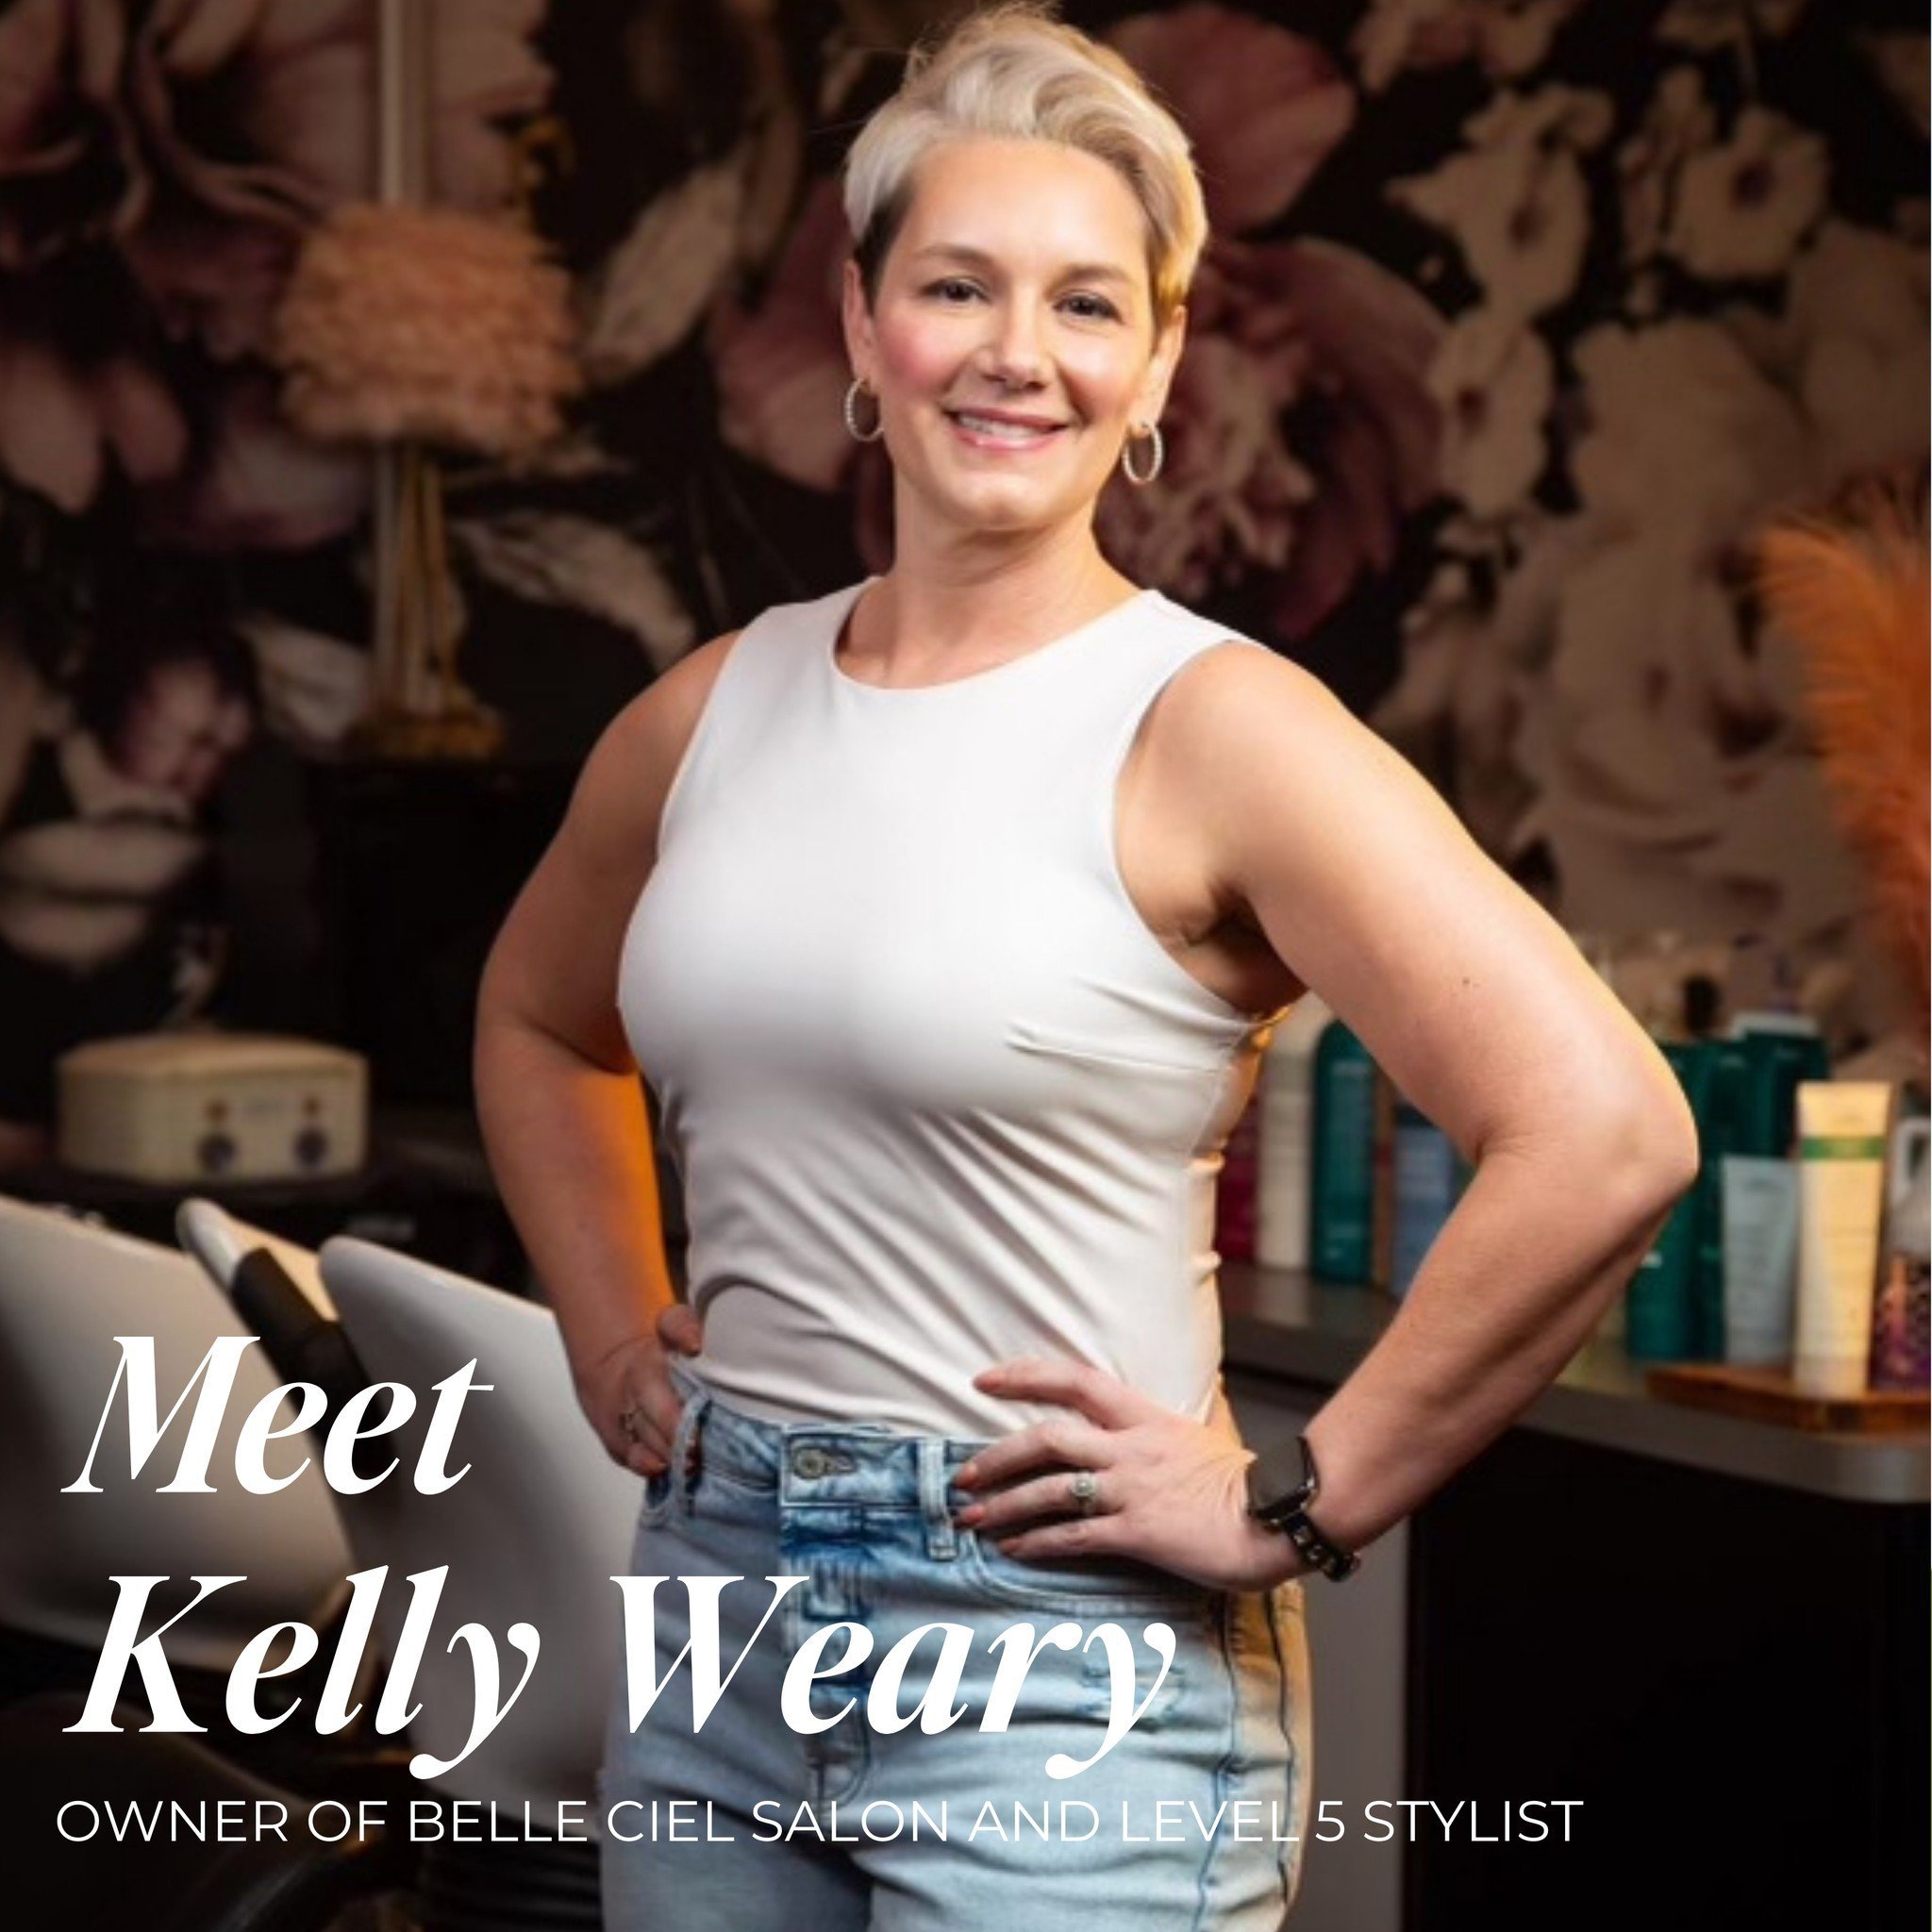 Member Monday- Owner of  Belle Ciel Salon and Level 5 stylist, Kelly has 20 years behind the chair. In 2022, an incredible opportunity presented itself when Kelly had the chance to acquire her salon. Belle Ciel was born, a name that beautifully captu